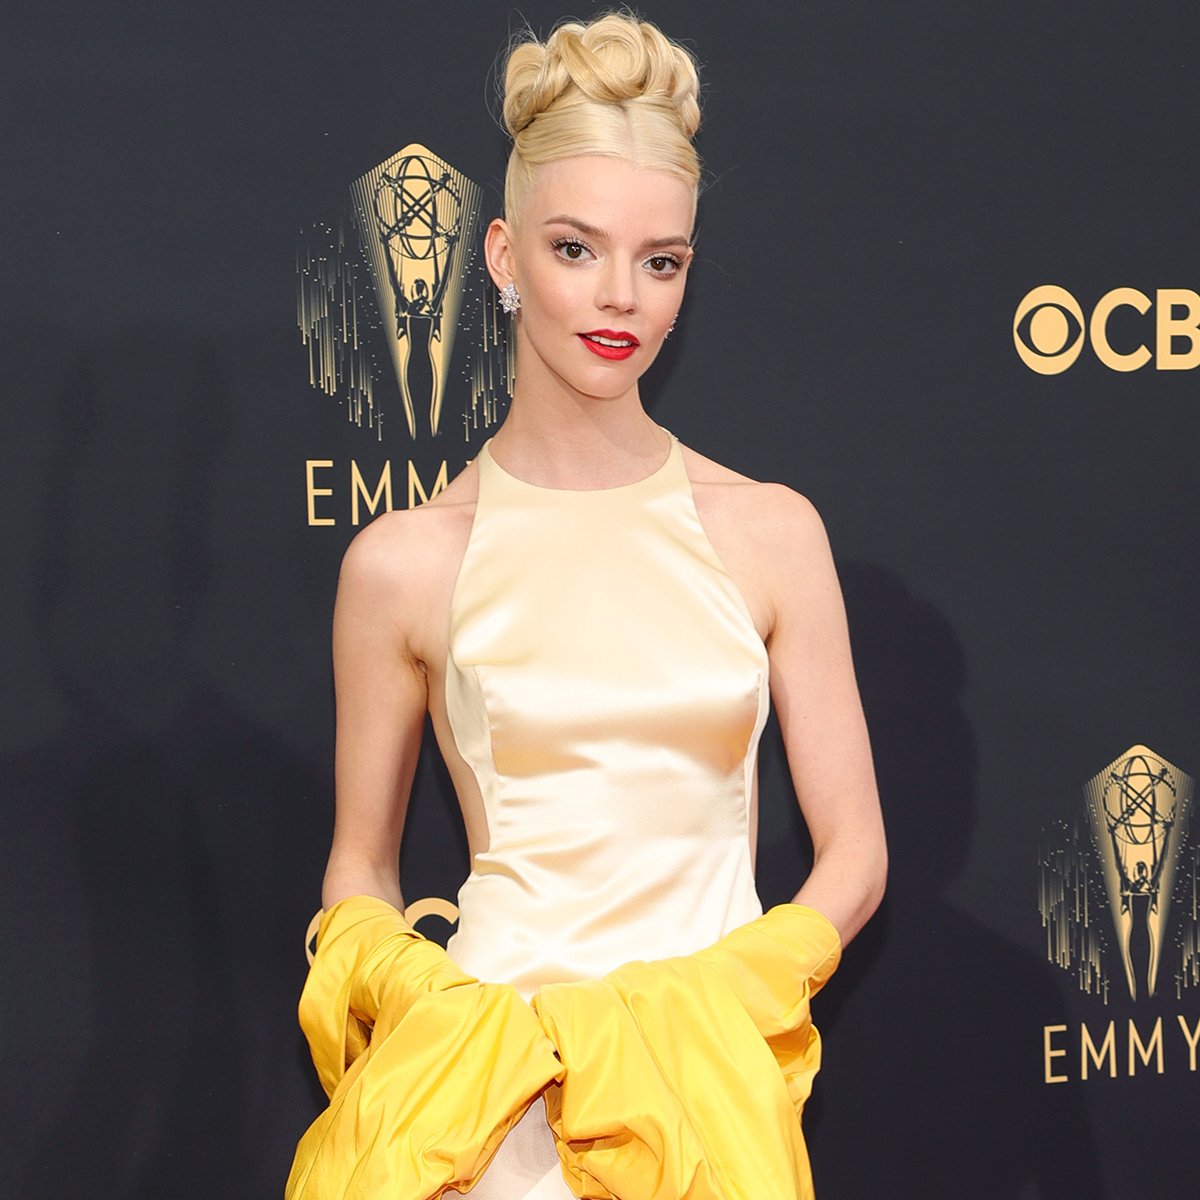 Anya Taylor-Joy's Fashion Game Is on Point With Bold Yellow Gown at 2021 Emmys